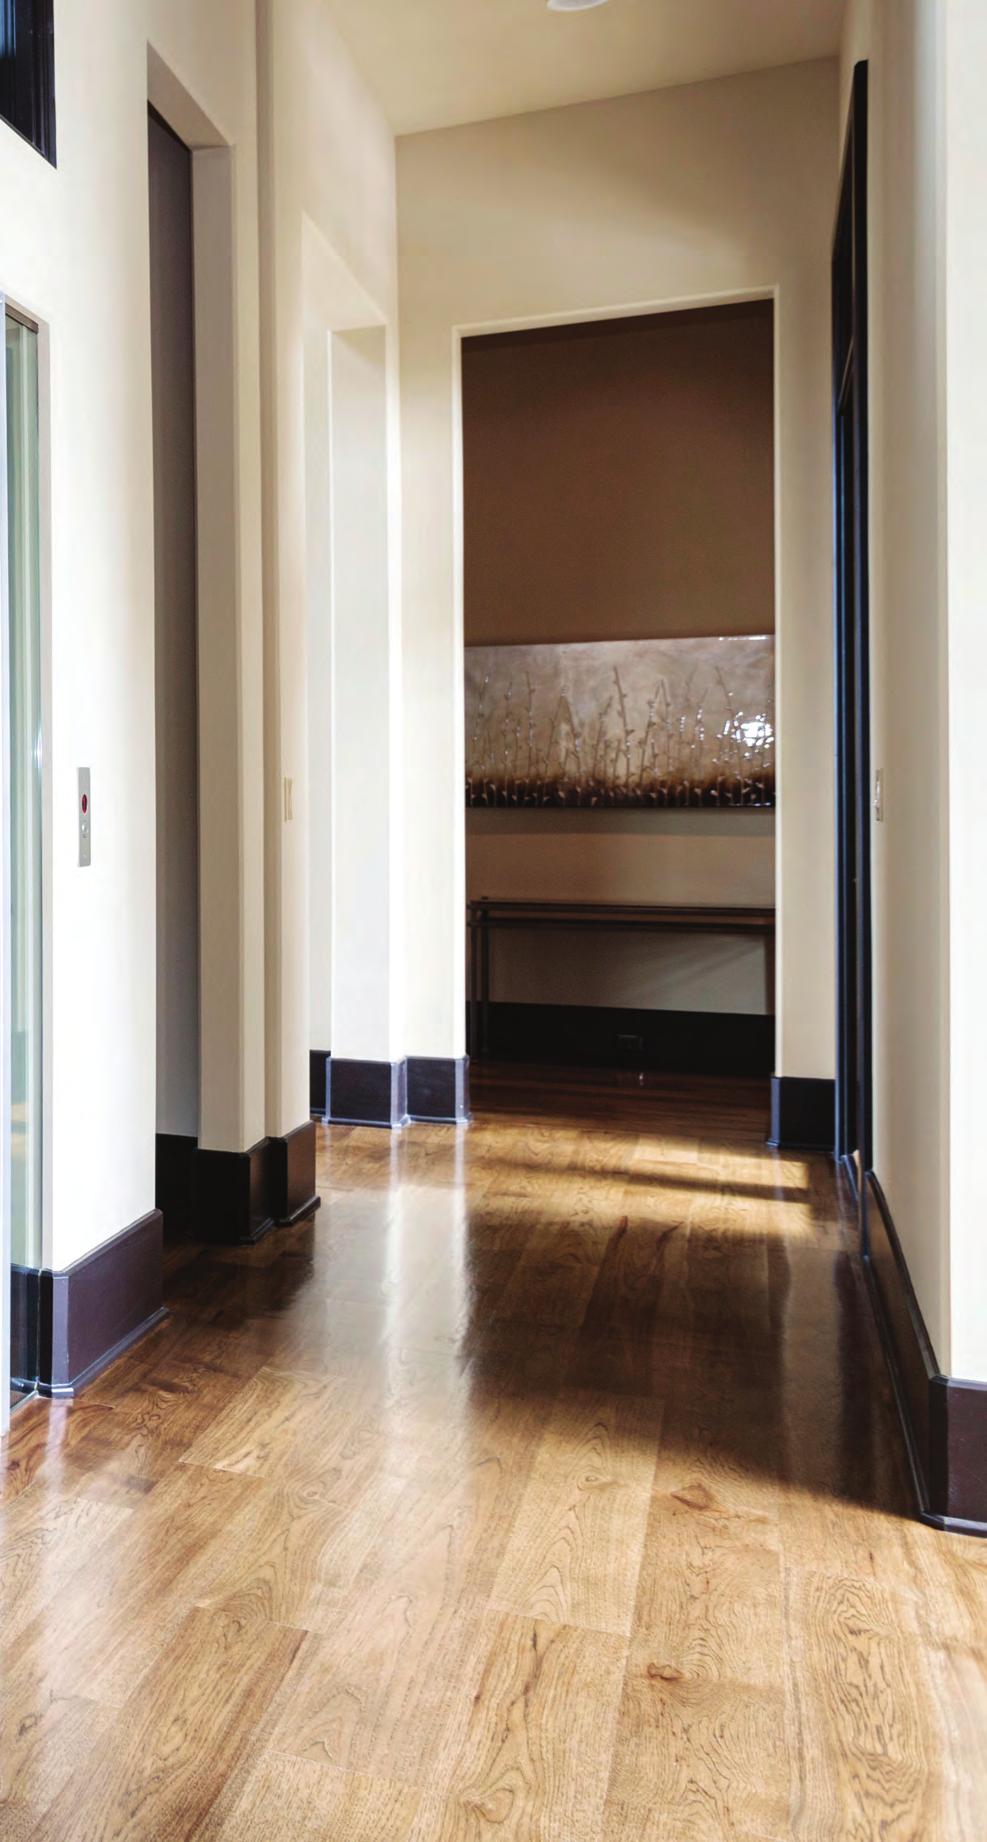 Classic. Modern. Traditional. Tasteful. Beautiful. The Symmetry Elevating Solutions team believes that any elevator should fit your home, style, and needs.